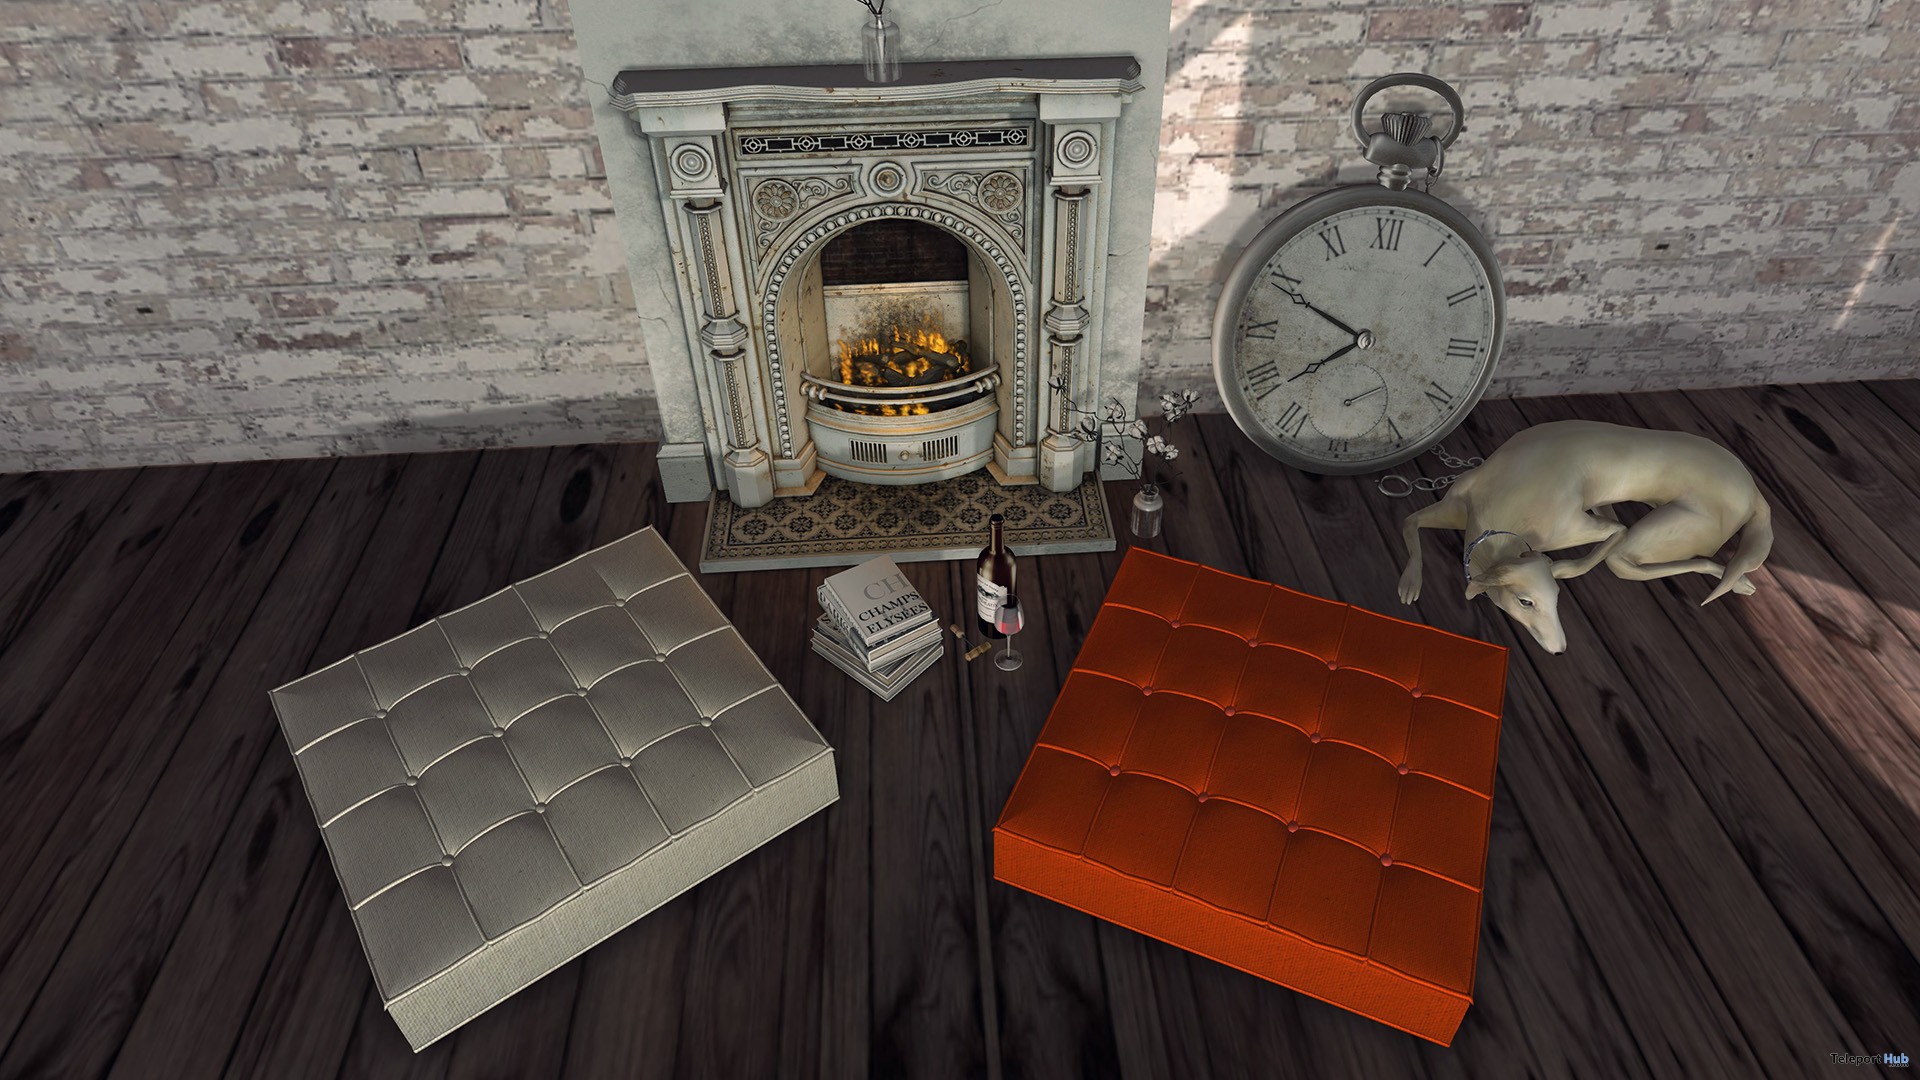 New Release: Tufted French Floor Cushion [Adult] & [PG] by [satus Inc] - Teleport Hub - teleporthub.com